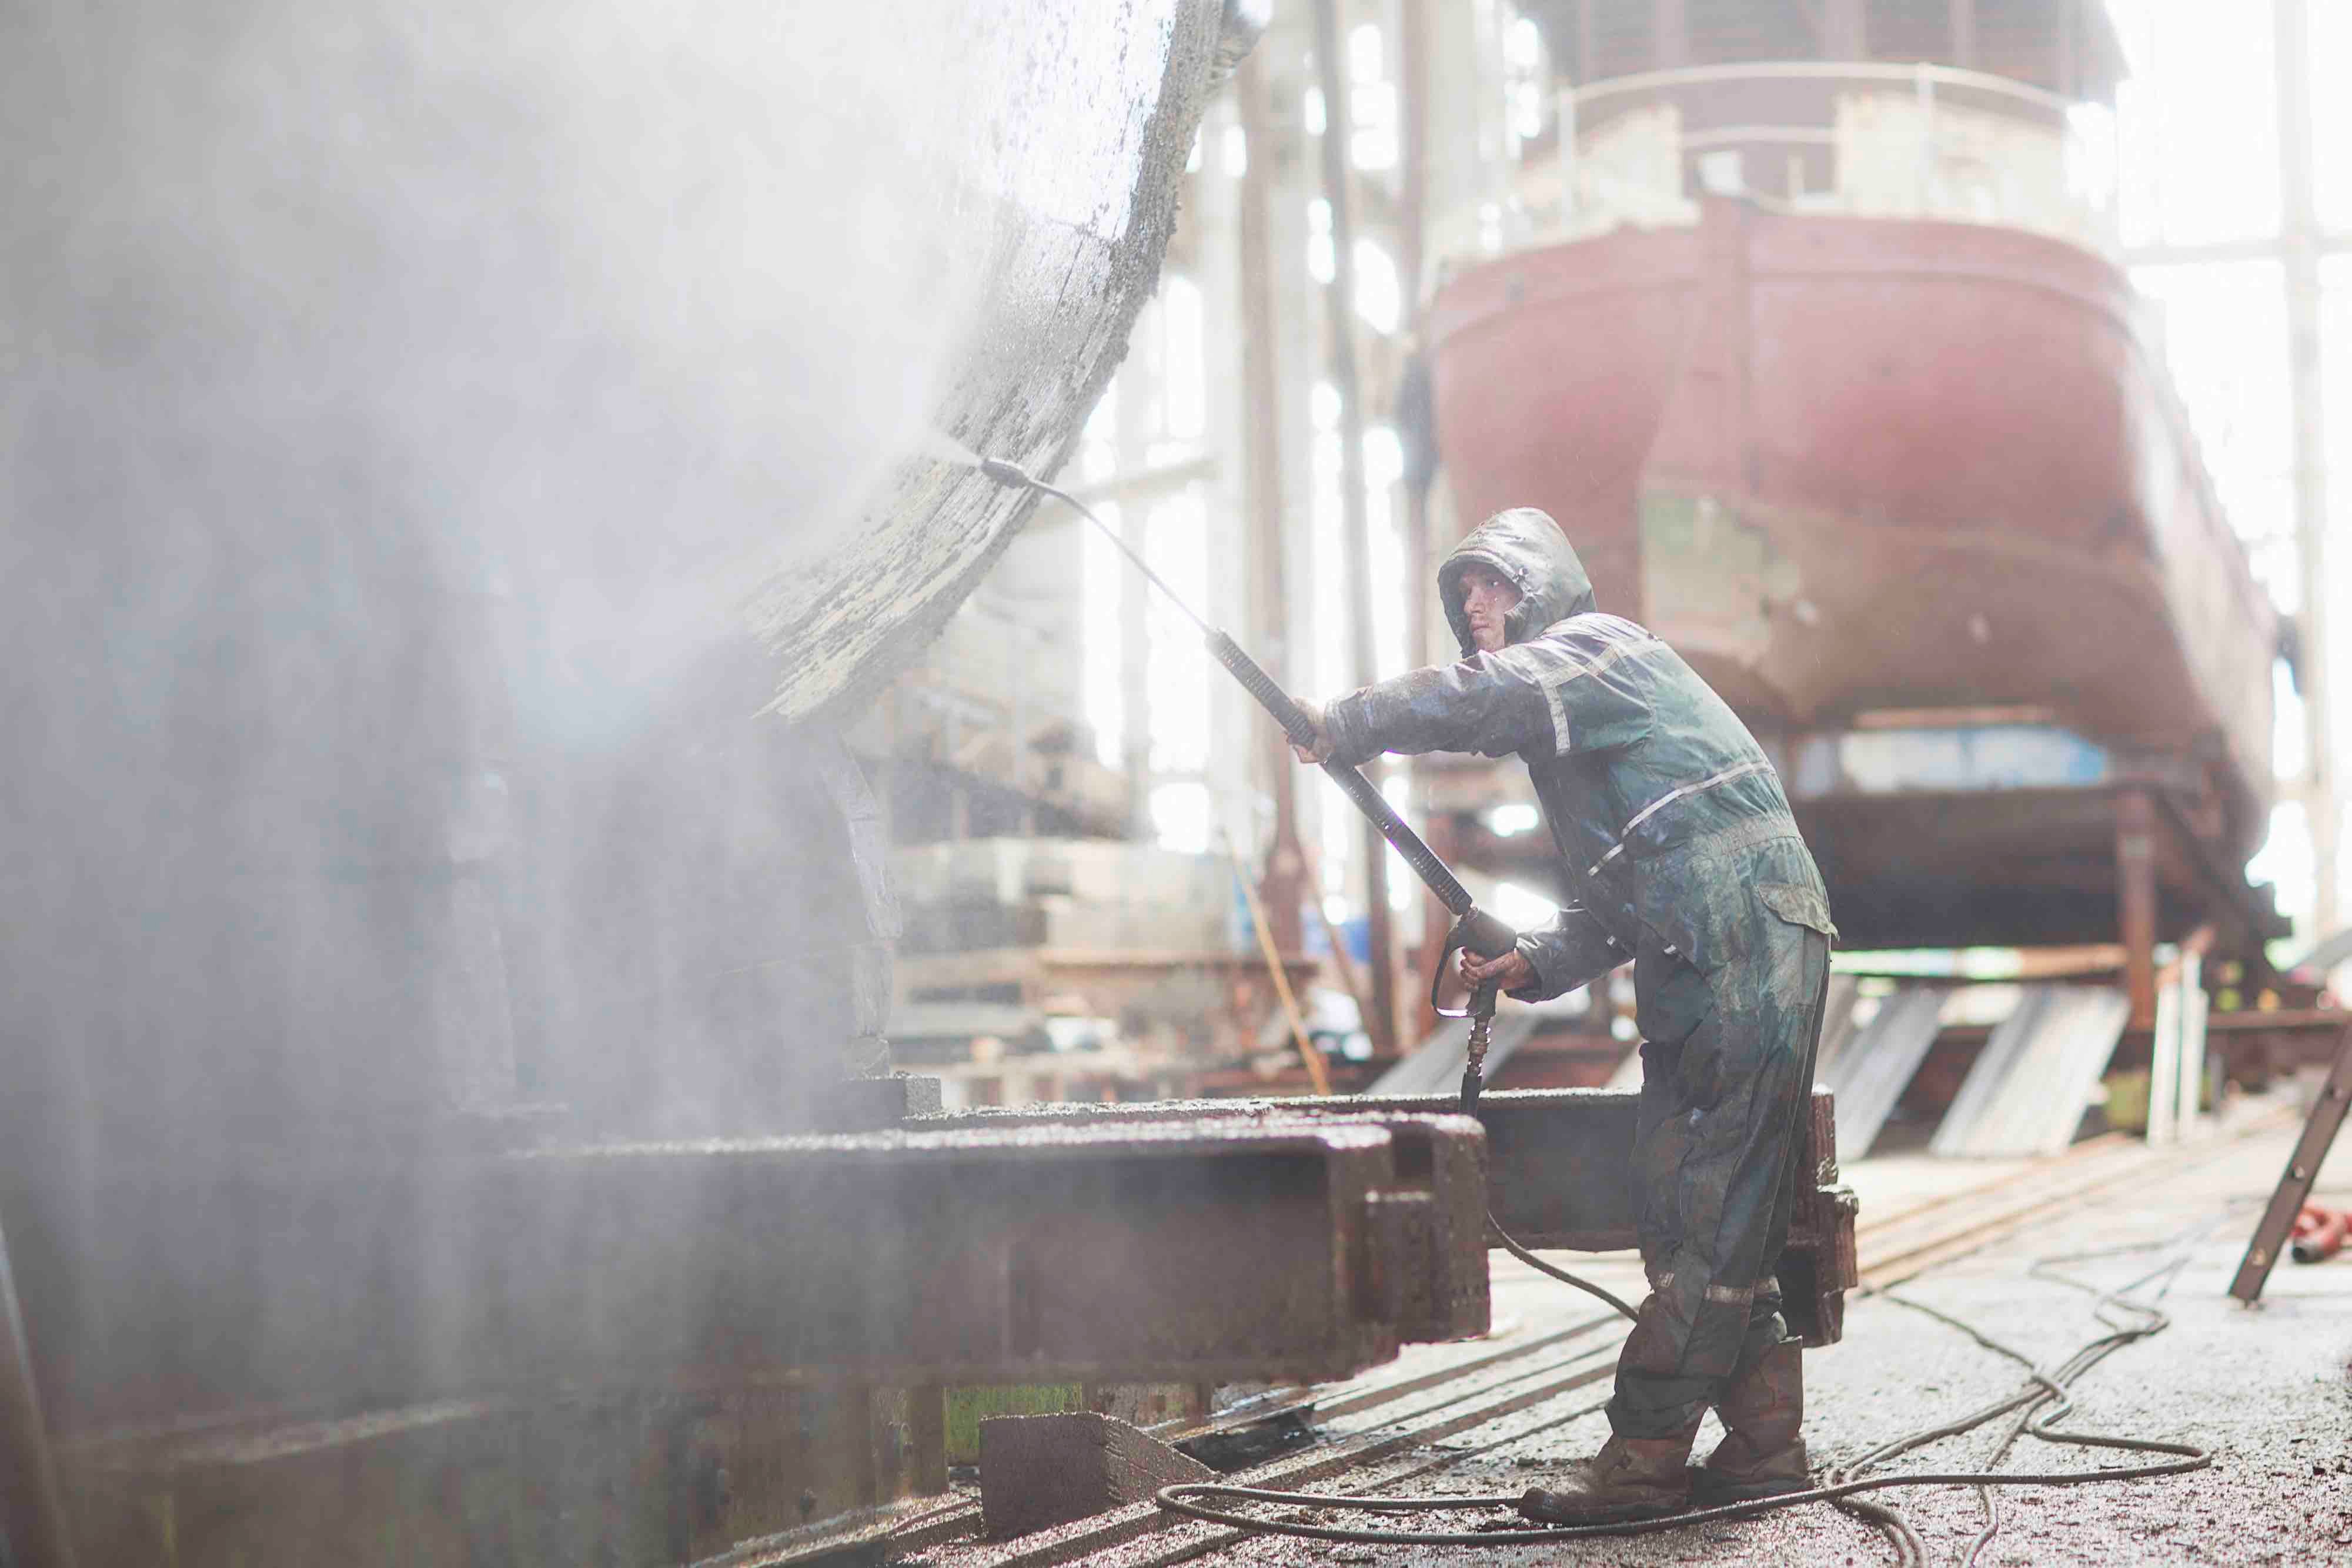 A worker is pressure washing a boat in a shipyard, with the water spray visible in the foreground. This is the sort of environment industrial computers have to be able to handle. 